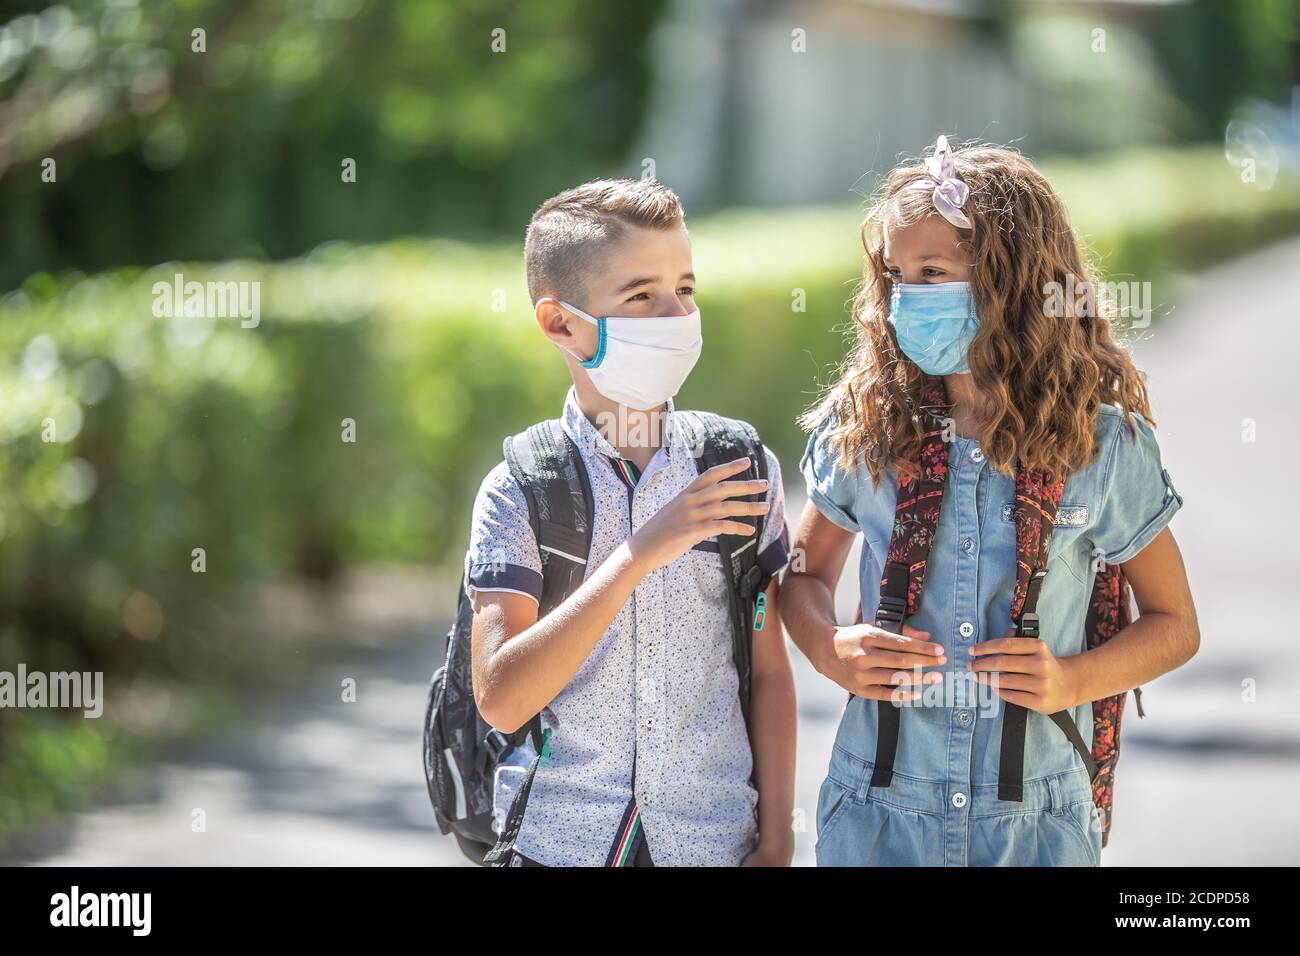 Two young friends classmates with face masks talk on their way to school during the Covid-19 quarantine. Stock Photo